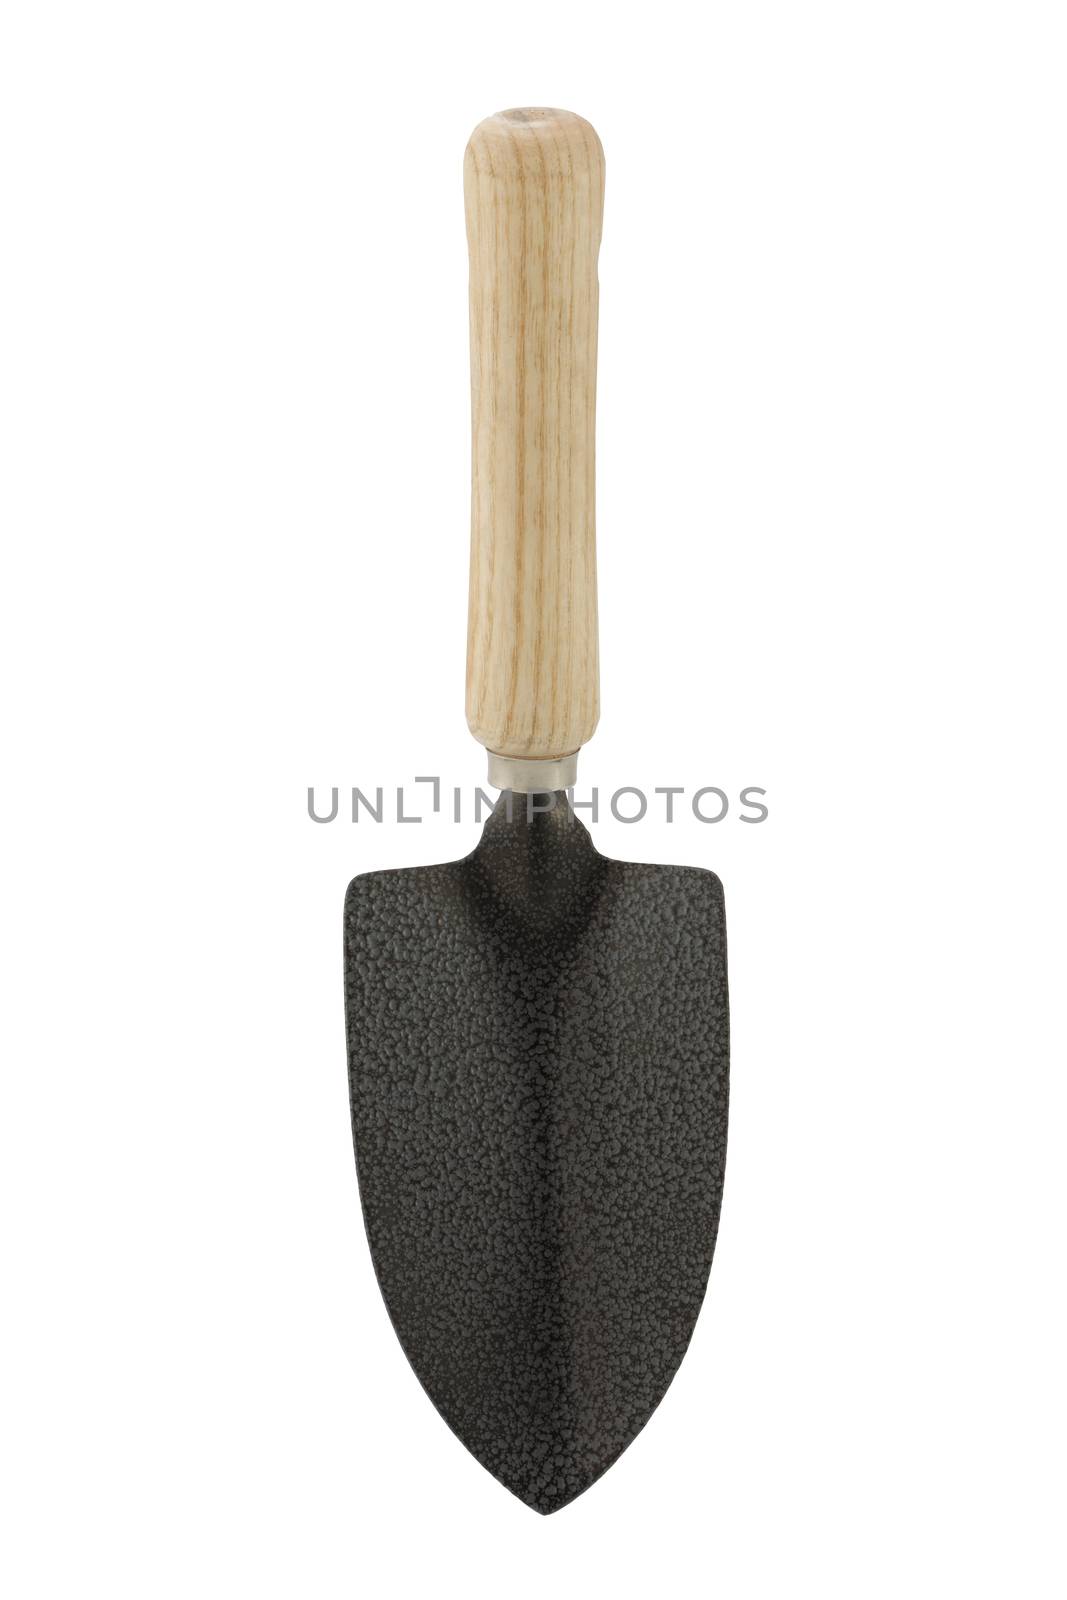 Garden hand trowel isolated on white with clipping path by VivacityImages